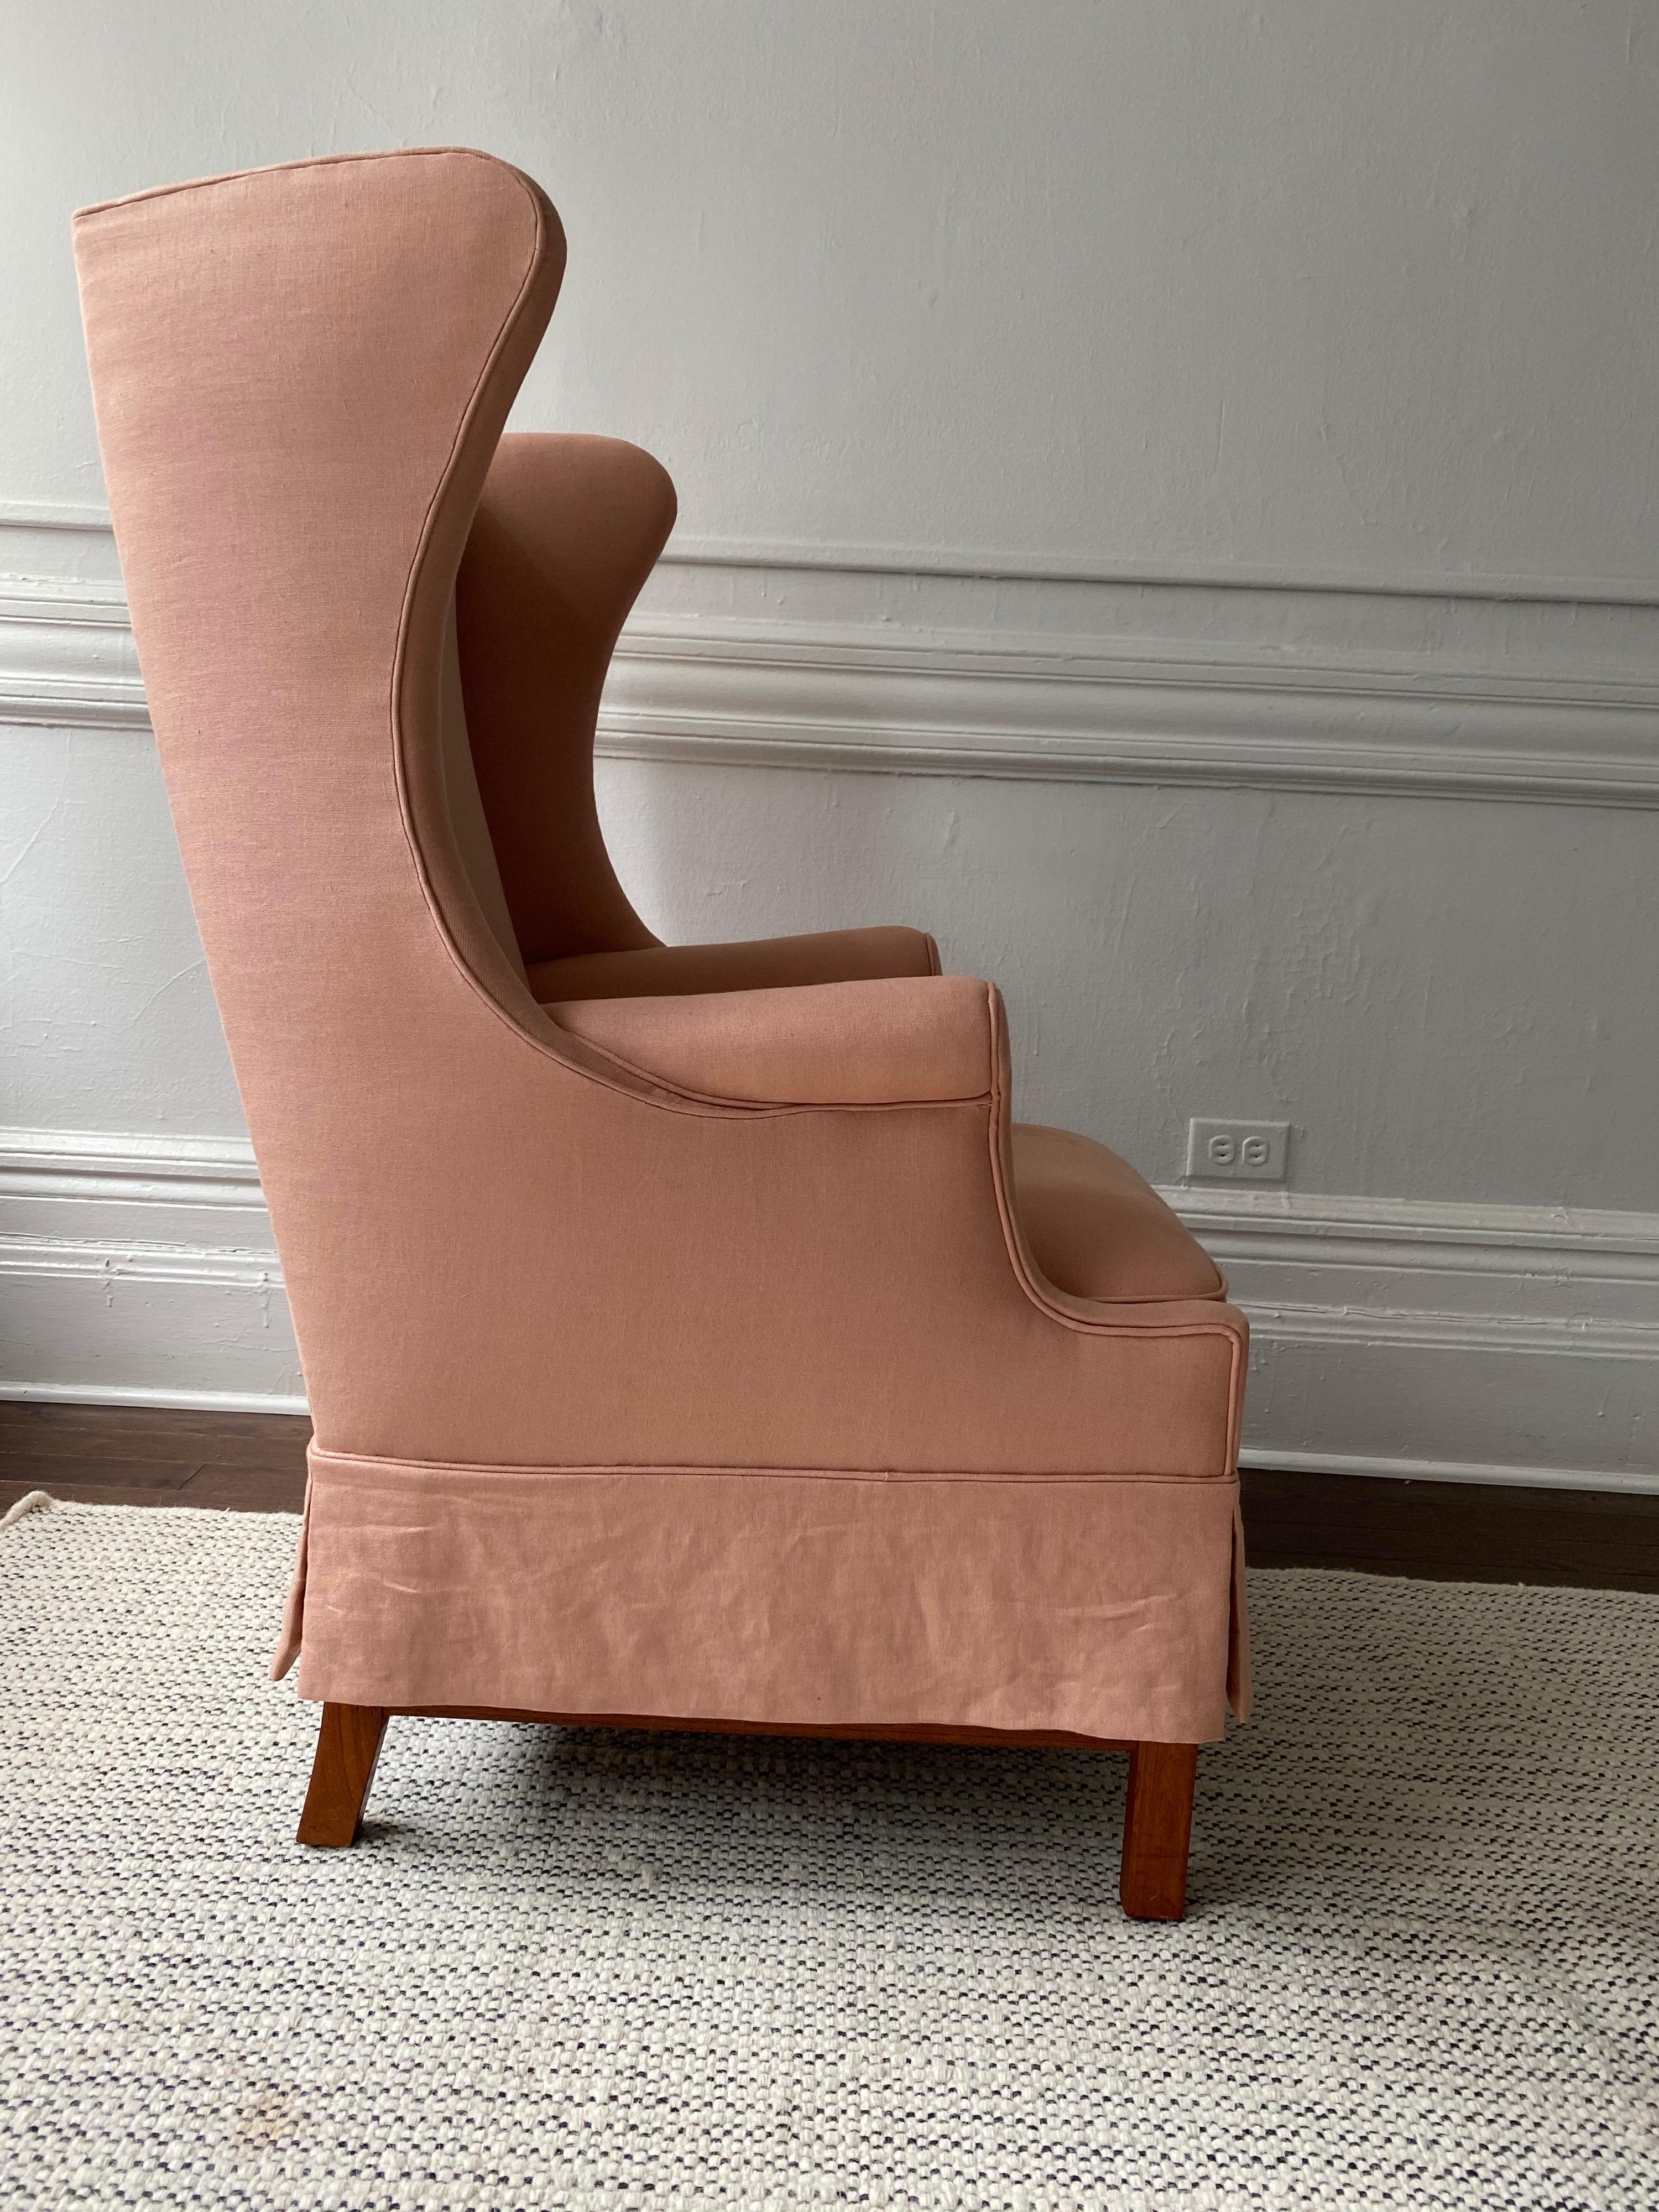 Wingback chair designed by Hans Thomas Jensen and made by Jacob Kjaer 

Cuban mahogany legs with new linen upholstery

Denmark, 1942.